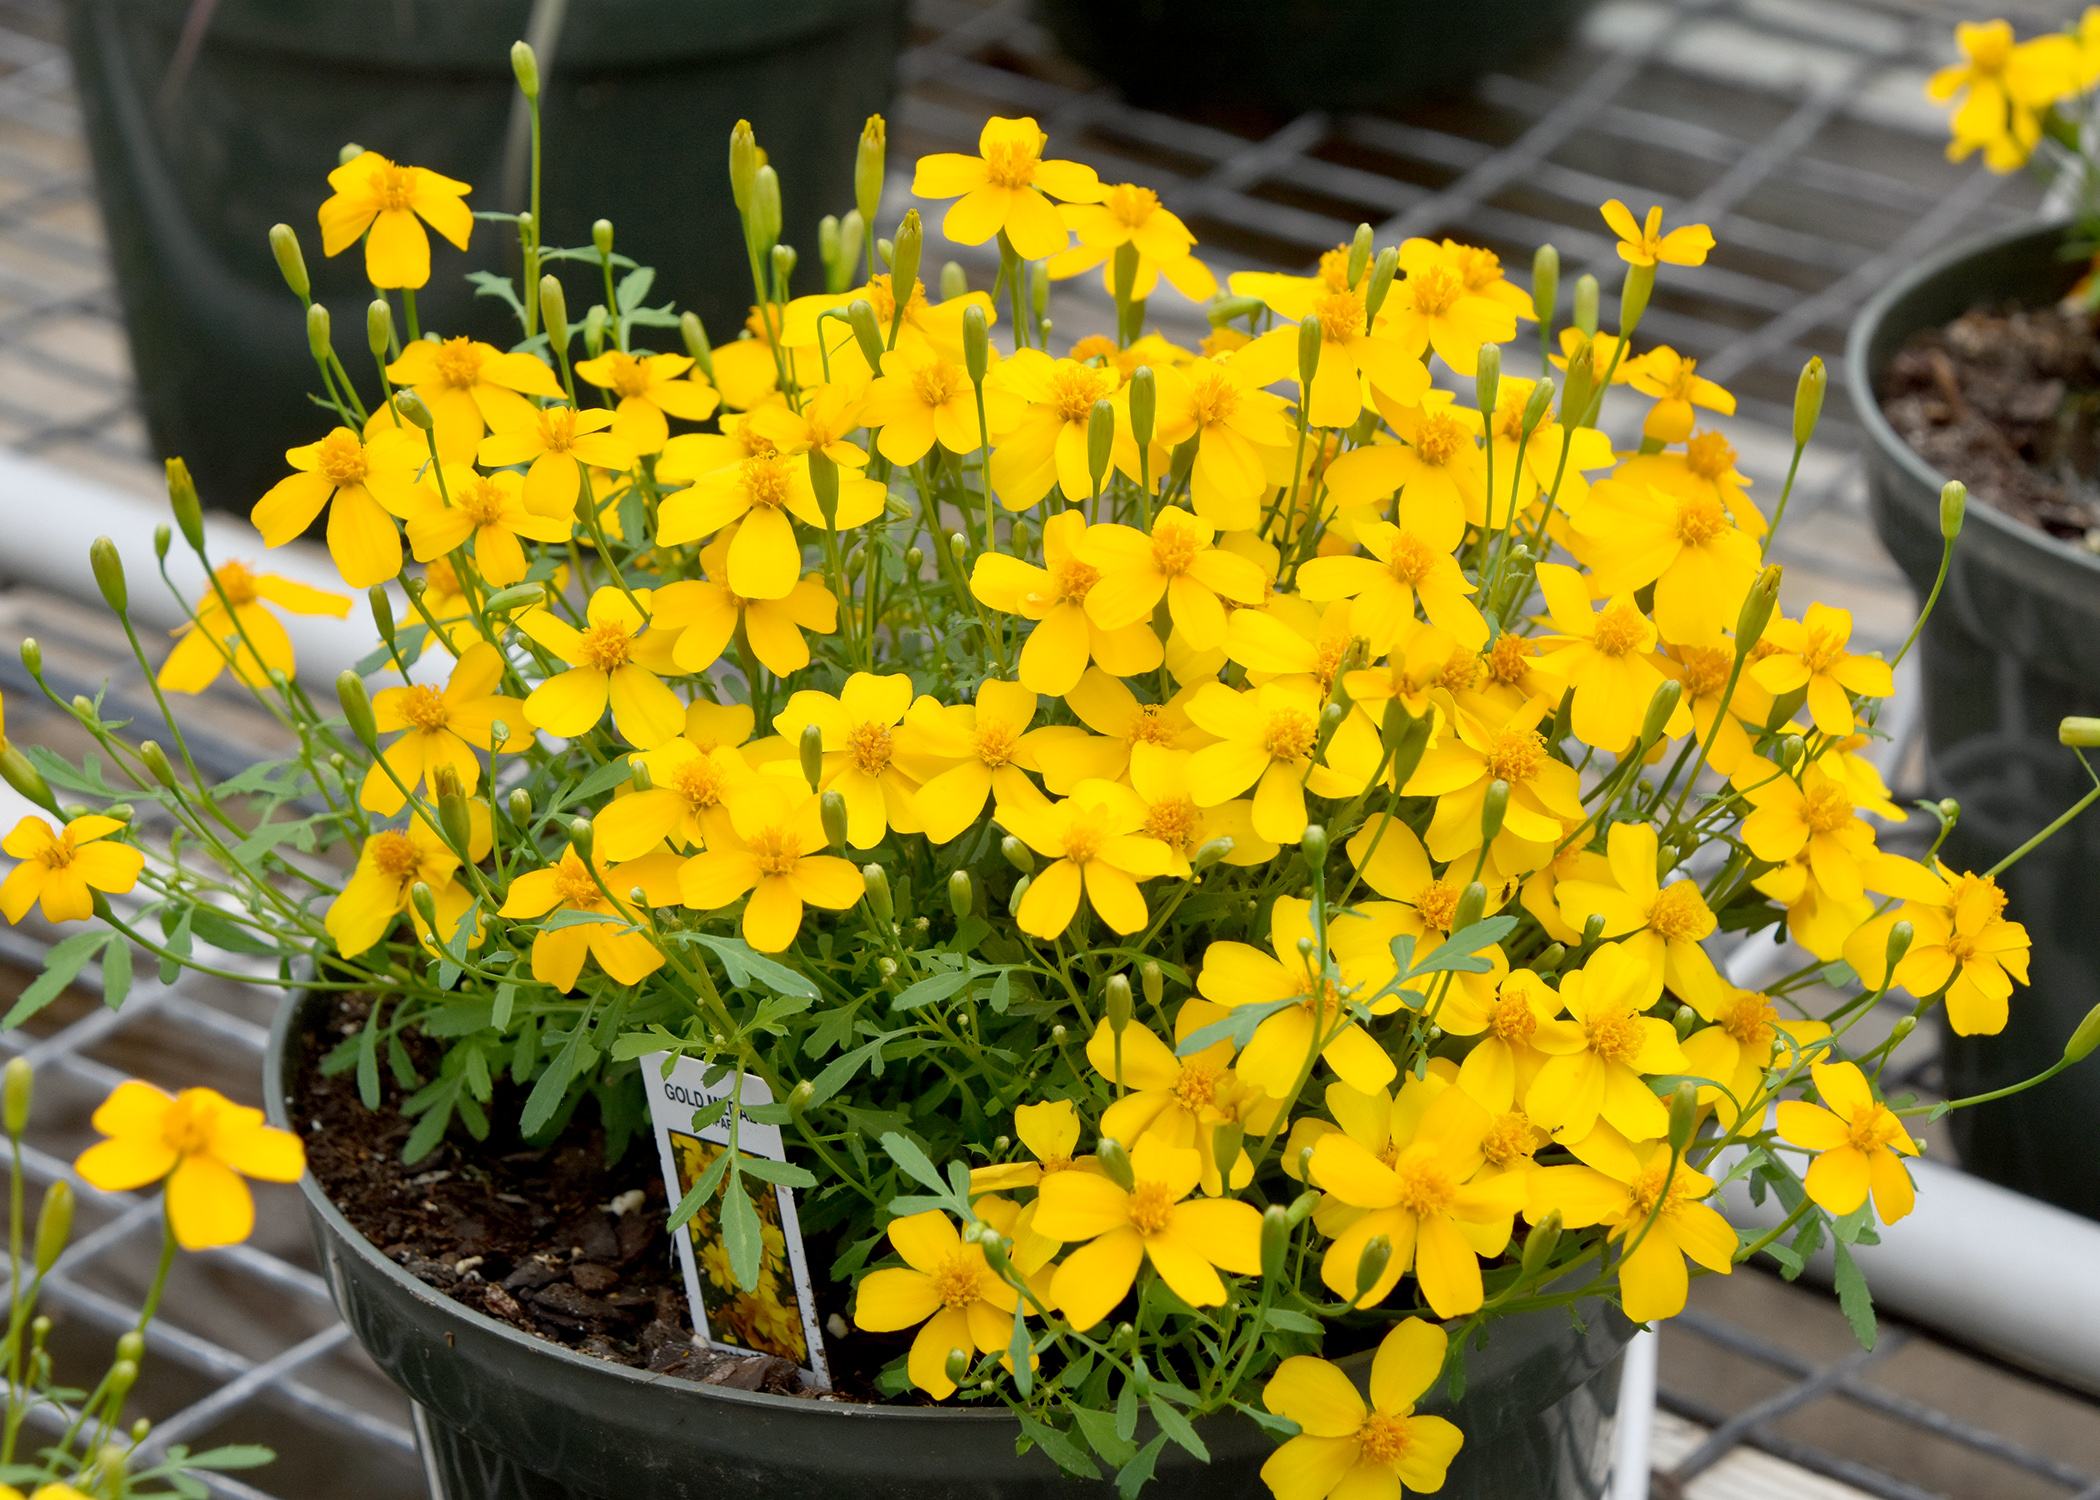 The Mexican mint marigold, also called Mexican tarragon, is part of the widely diverse family of marigolds. (Photo by MSU Extension/Gary Bachman)